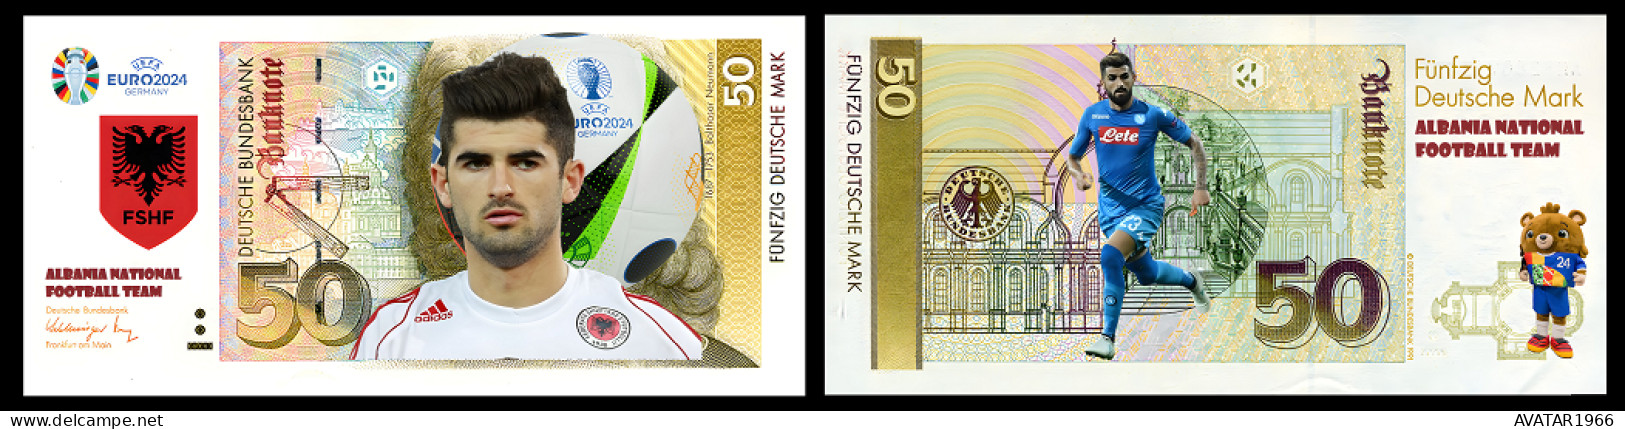 UEFA European Football Championship 2024 Qualified Country Albania 8 Pieces Germany Fantasy Paper Money - [15] Commémoratifs & Emissions Spéciales